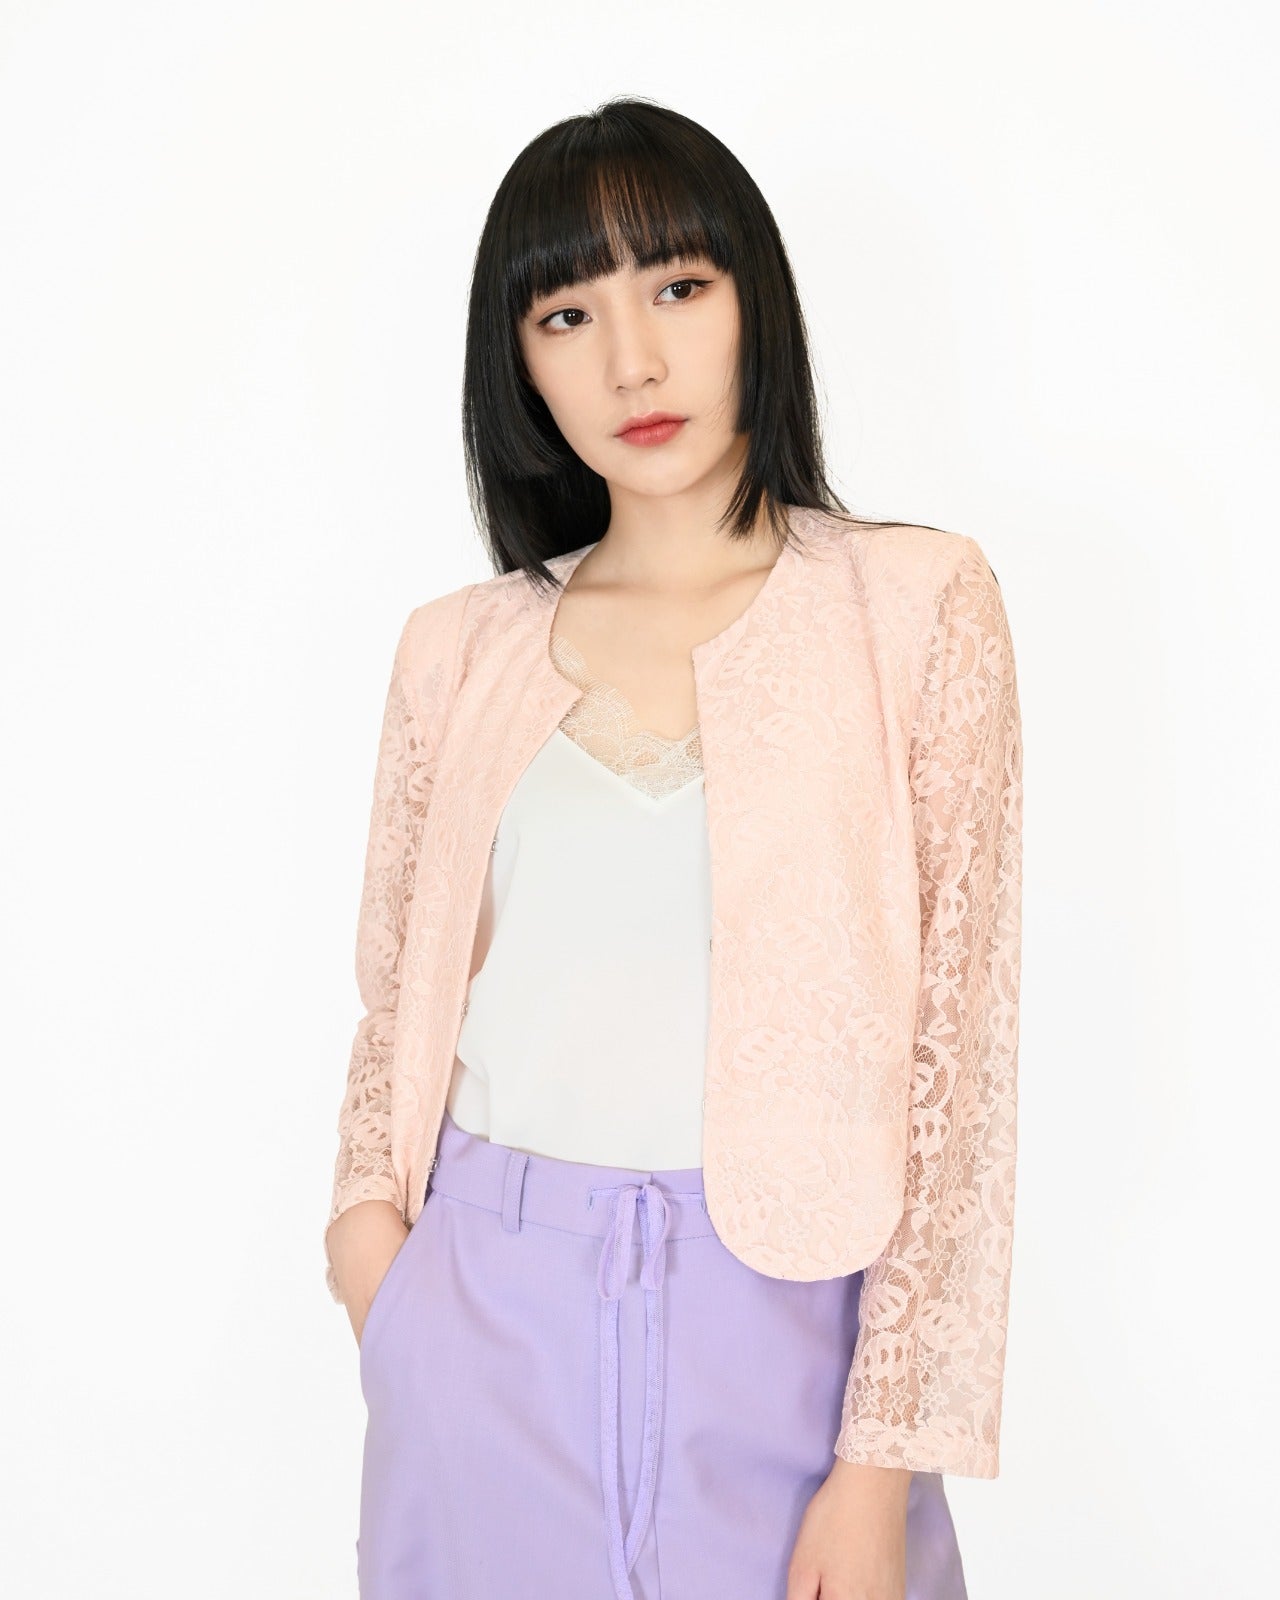 Load image into Gallery viewer, aalis VICTORIA lace jacket (Light pink)
